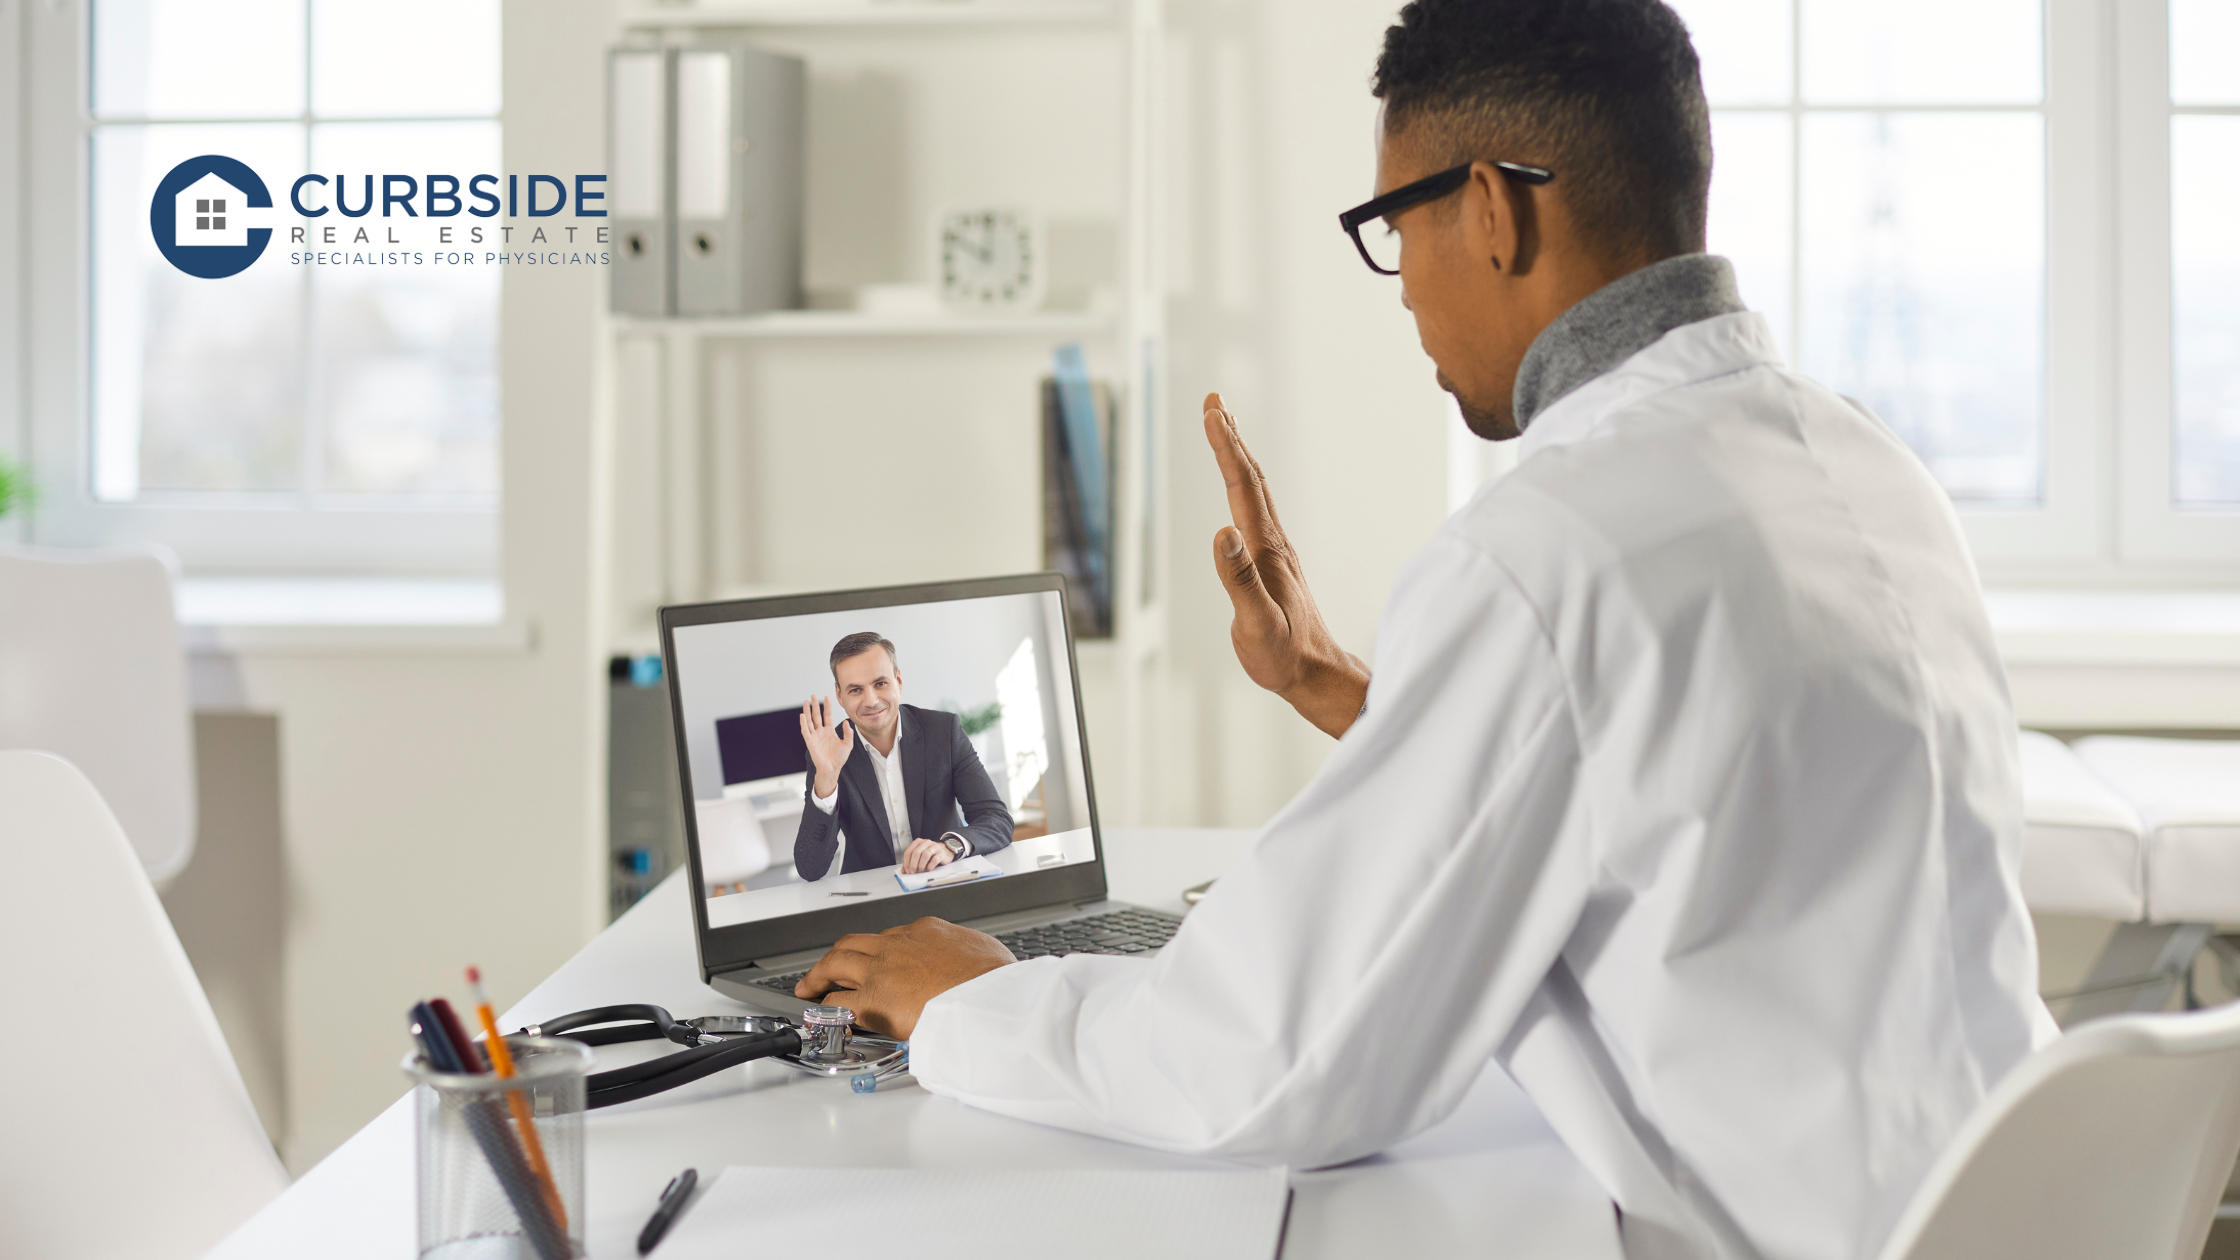 Discover how the telemedicine revolution is reshaping the home-buying preferences and choices of physicians. A deeper look into the new age of healthcare and housing.